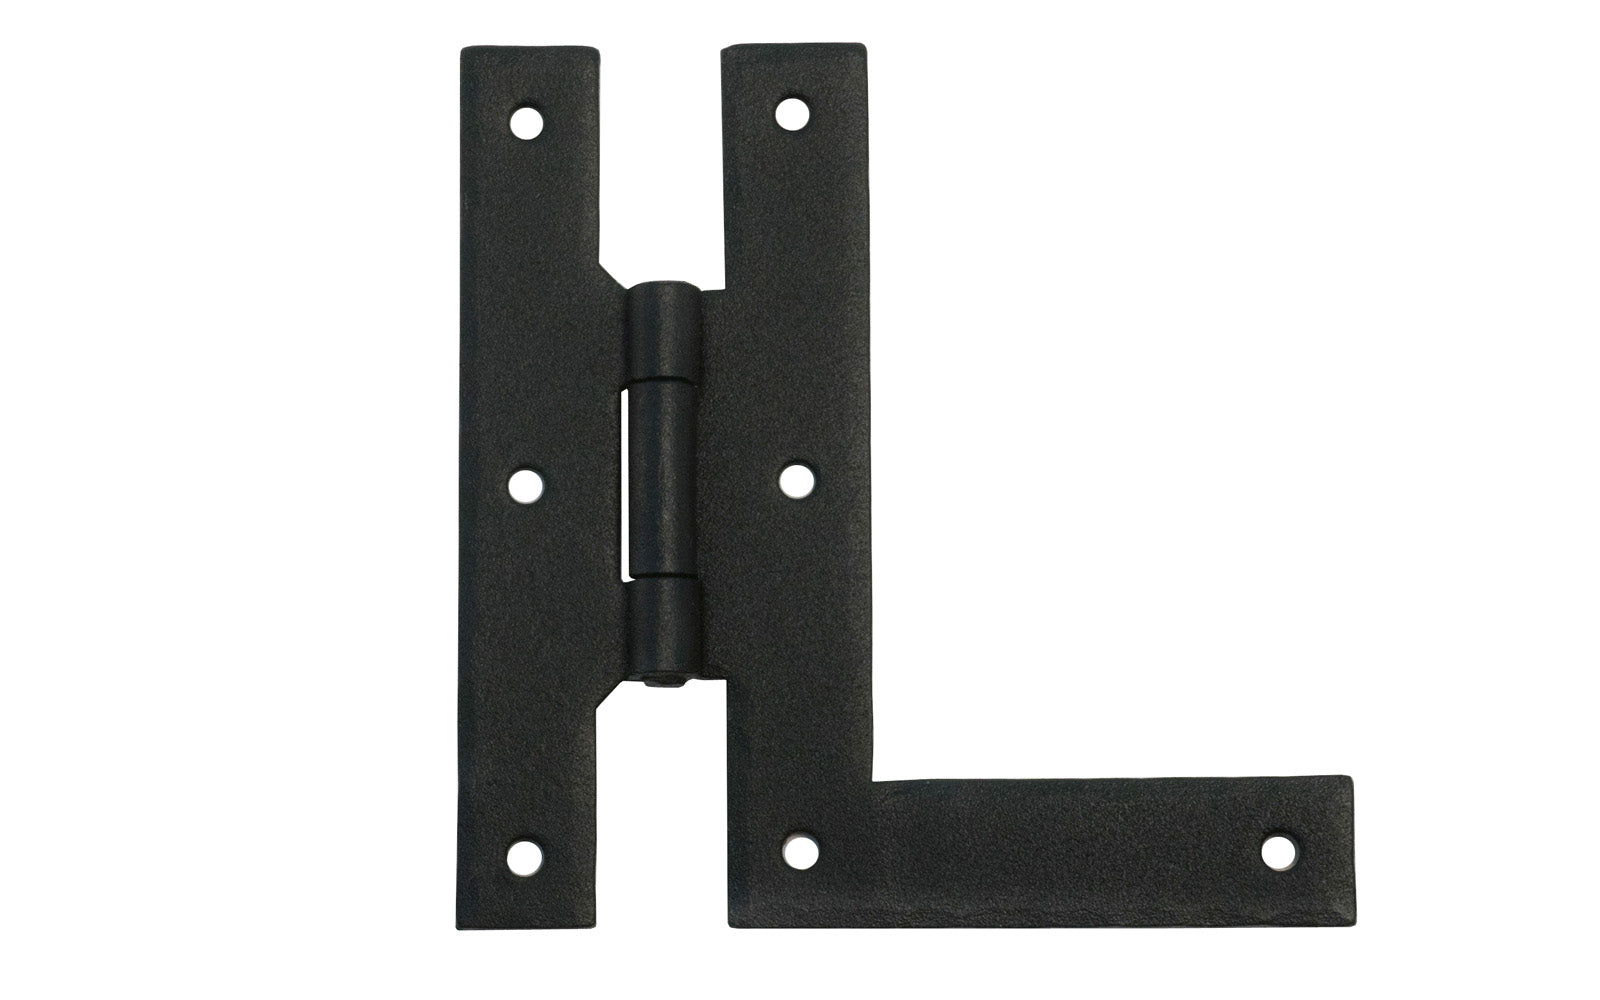 4" Forged Steel HL Hinges with a vintage-style looking black powder coated finish. Made of sturdy forged steel material. The HL hinge can be used on cabinets & doors, etc. Sold in sets (4 total hinges - 2 lefts & 2 rights). Includes twenty Phillips flat head screws. Model 88582.